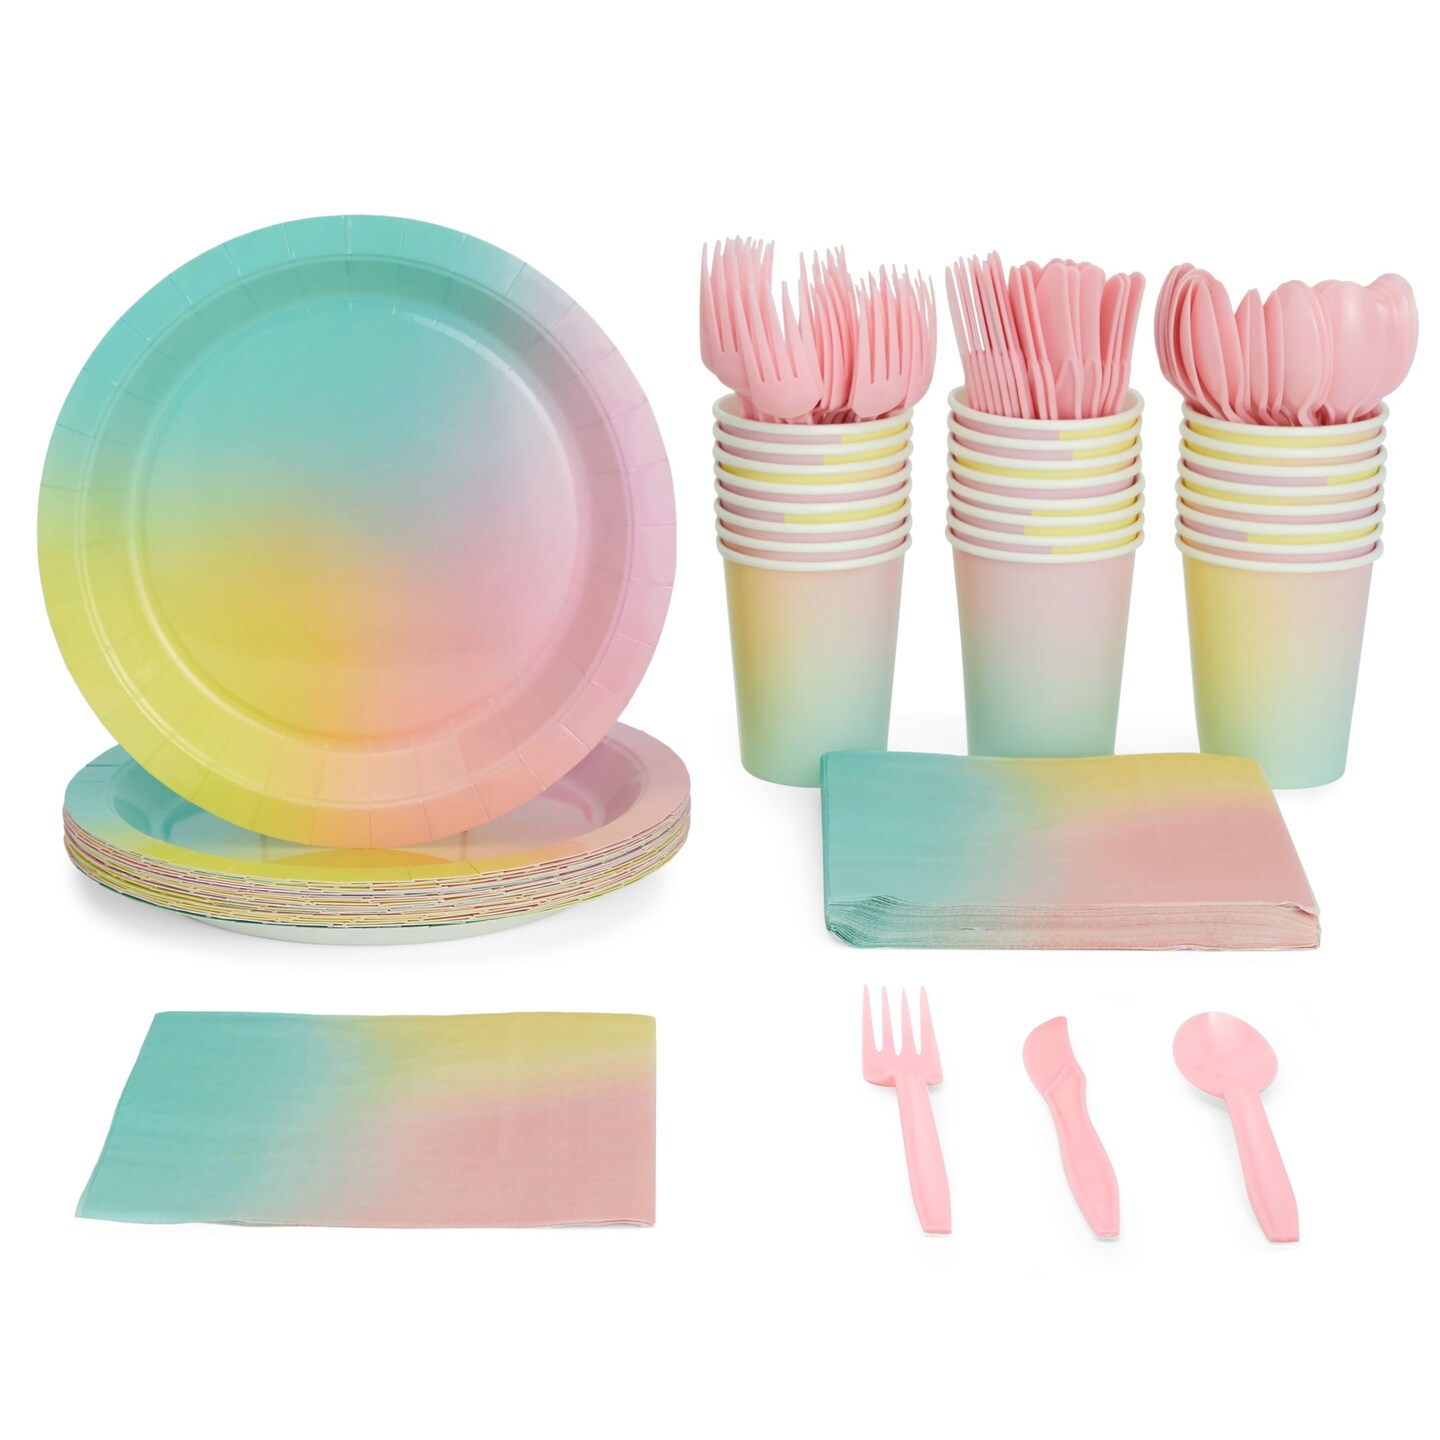 144 Piece Pastel Rainbow Birthday Party Supplies, Dinnerware with Paper Plates, Napkins, Cups, and Pink Cutlery (Serves 24)